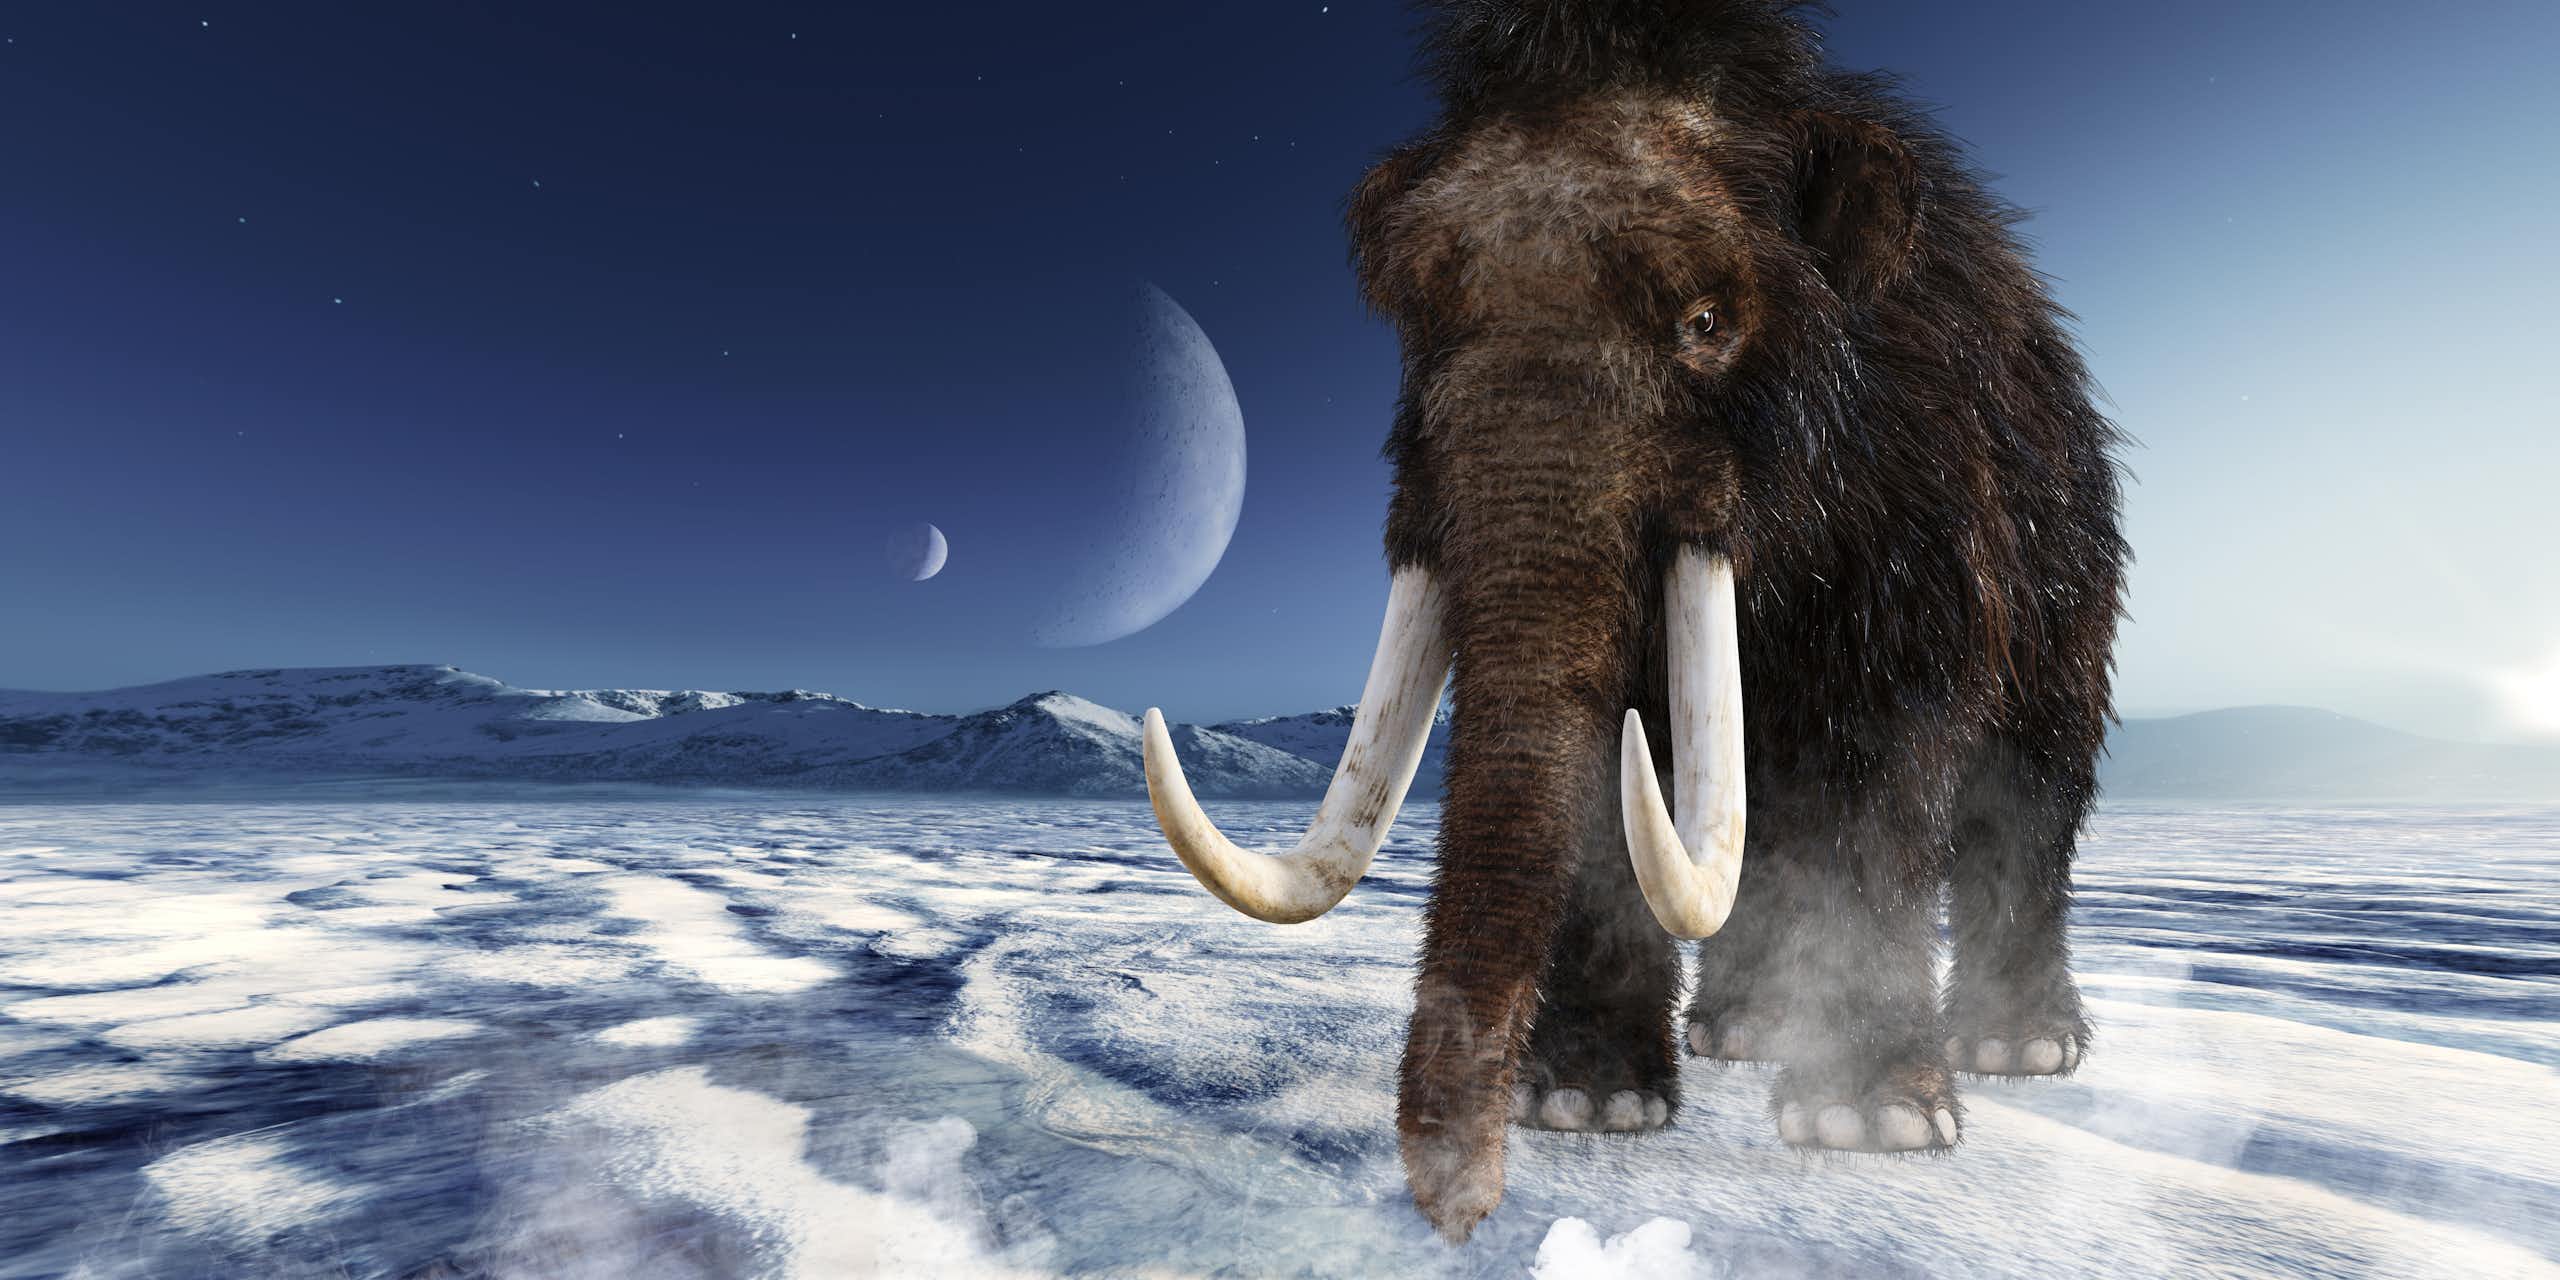 Illustration of a mammoth walking on ice.